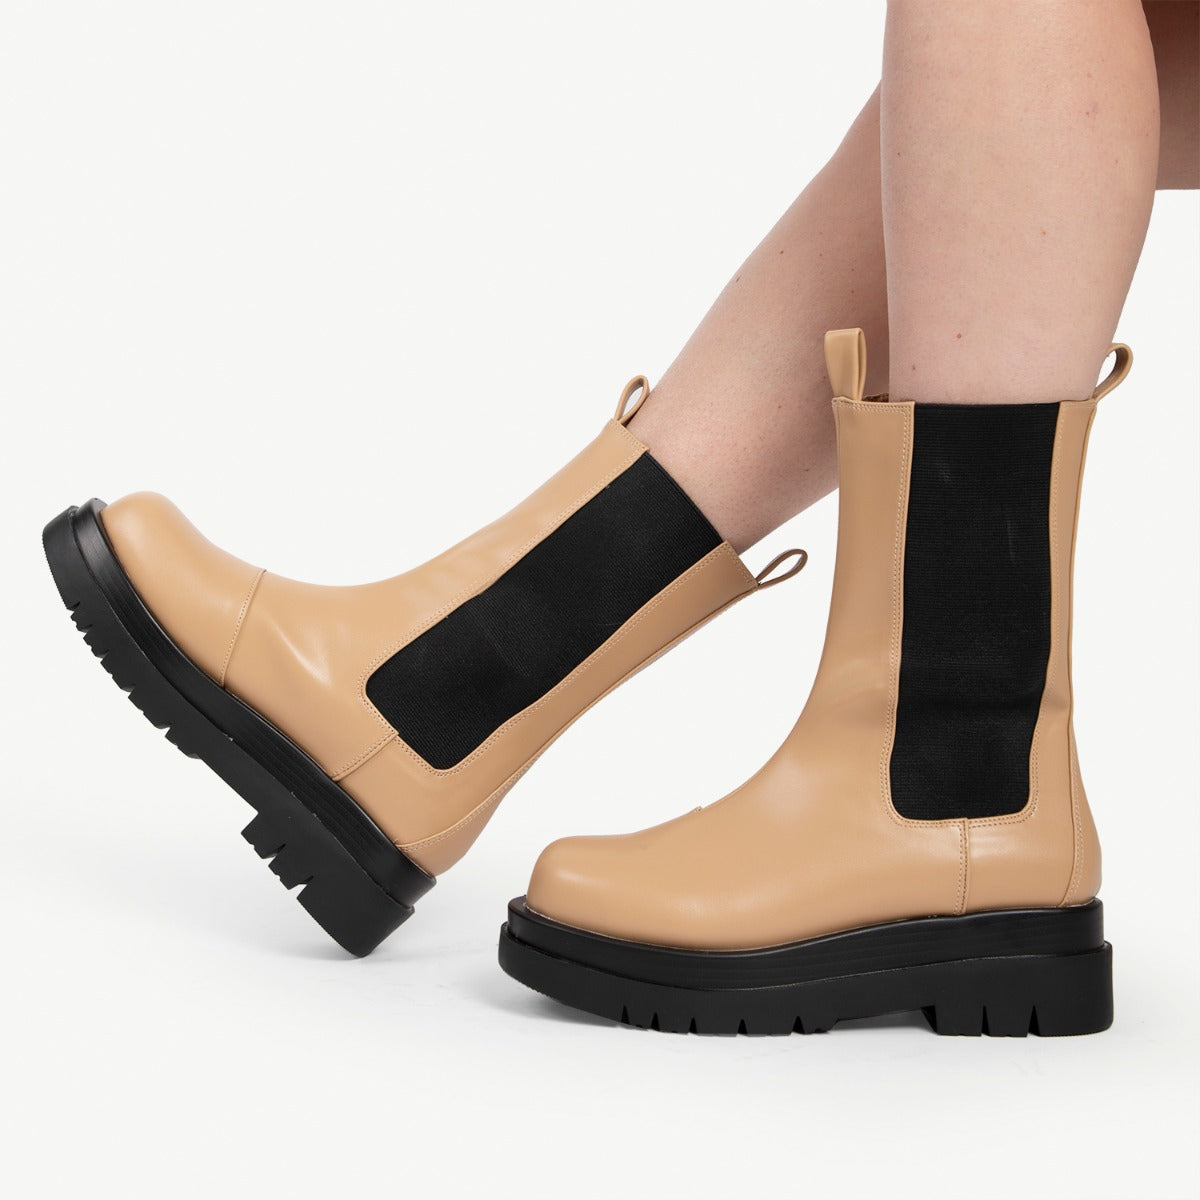 RAID Kendall Ankle Boot in Camel